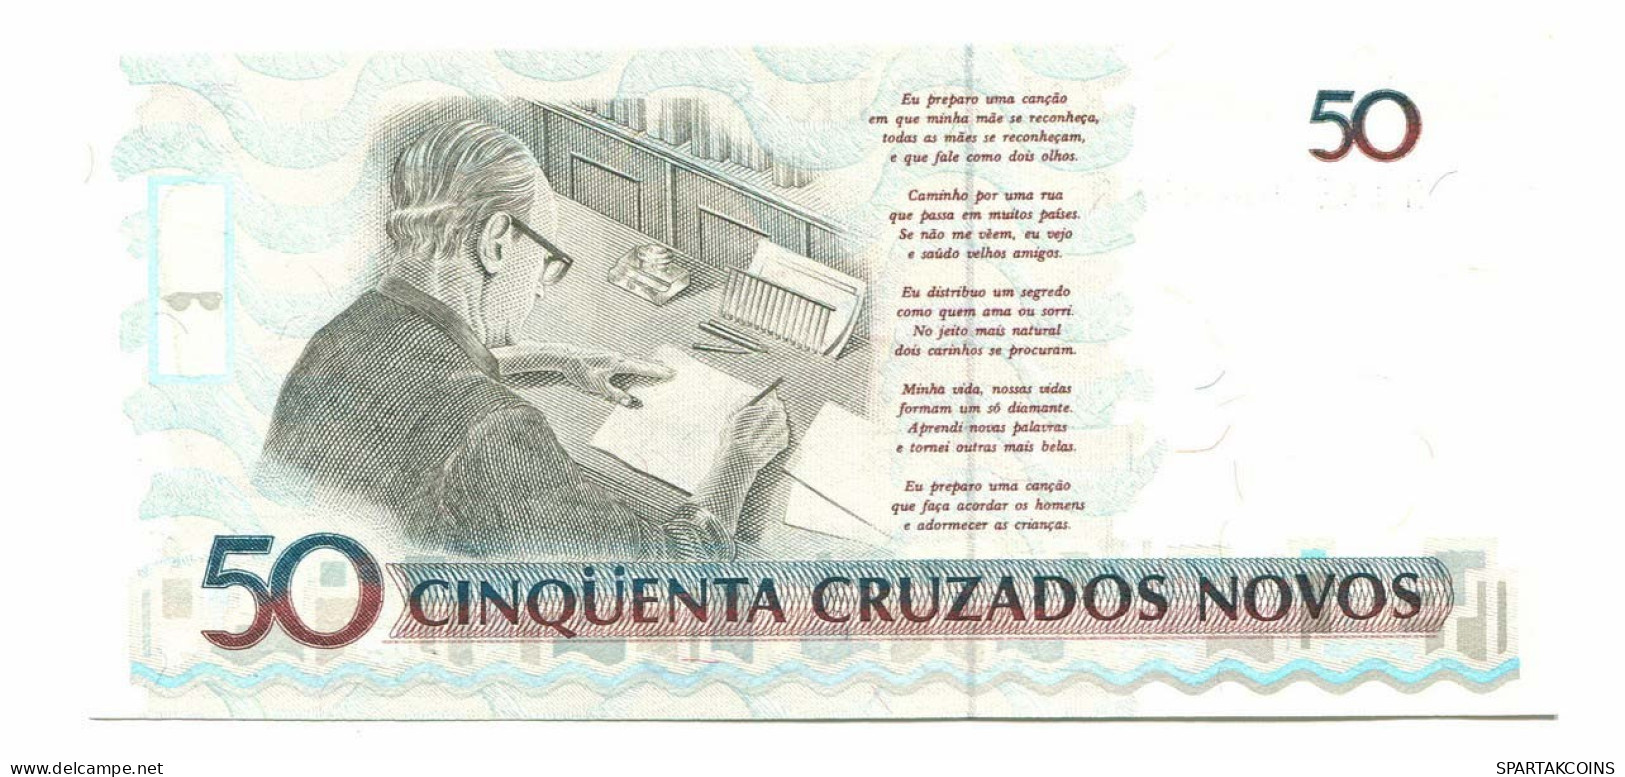 BRASIL 50 CRUZADOS 1990 UNC Paper Money Banknote #P10846.4 - [11] Local Banknote Issues